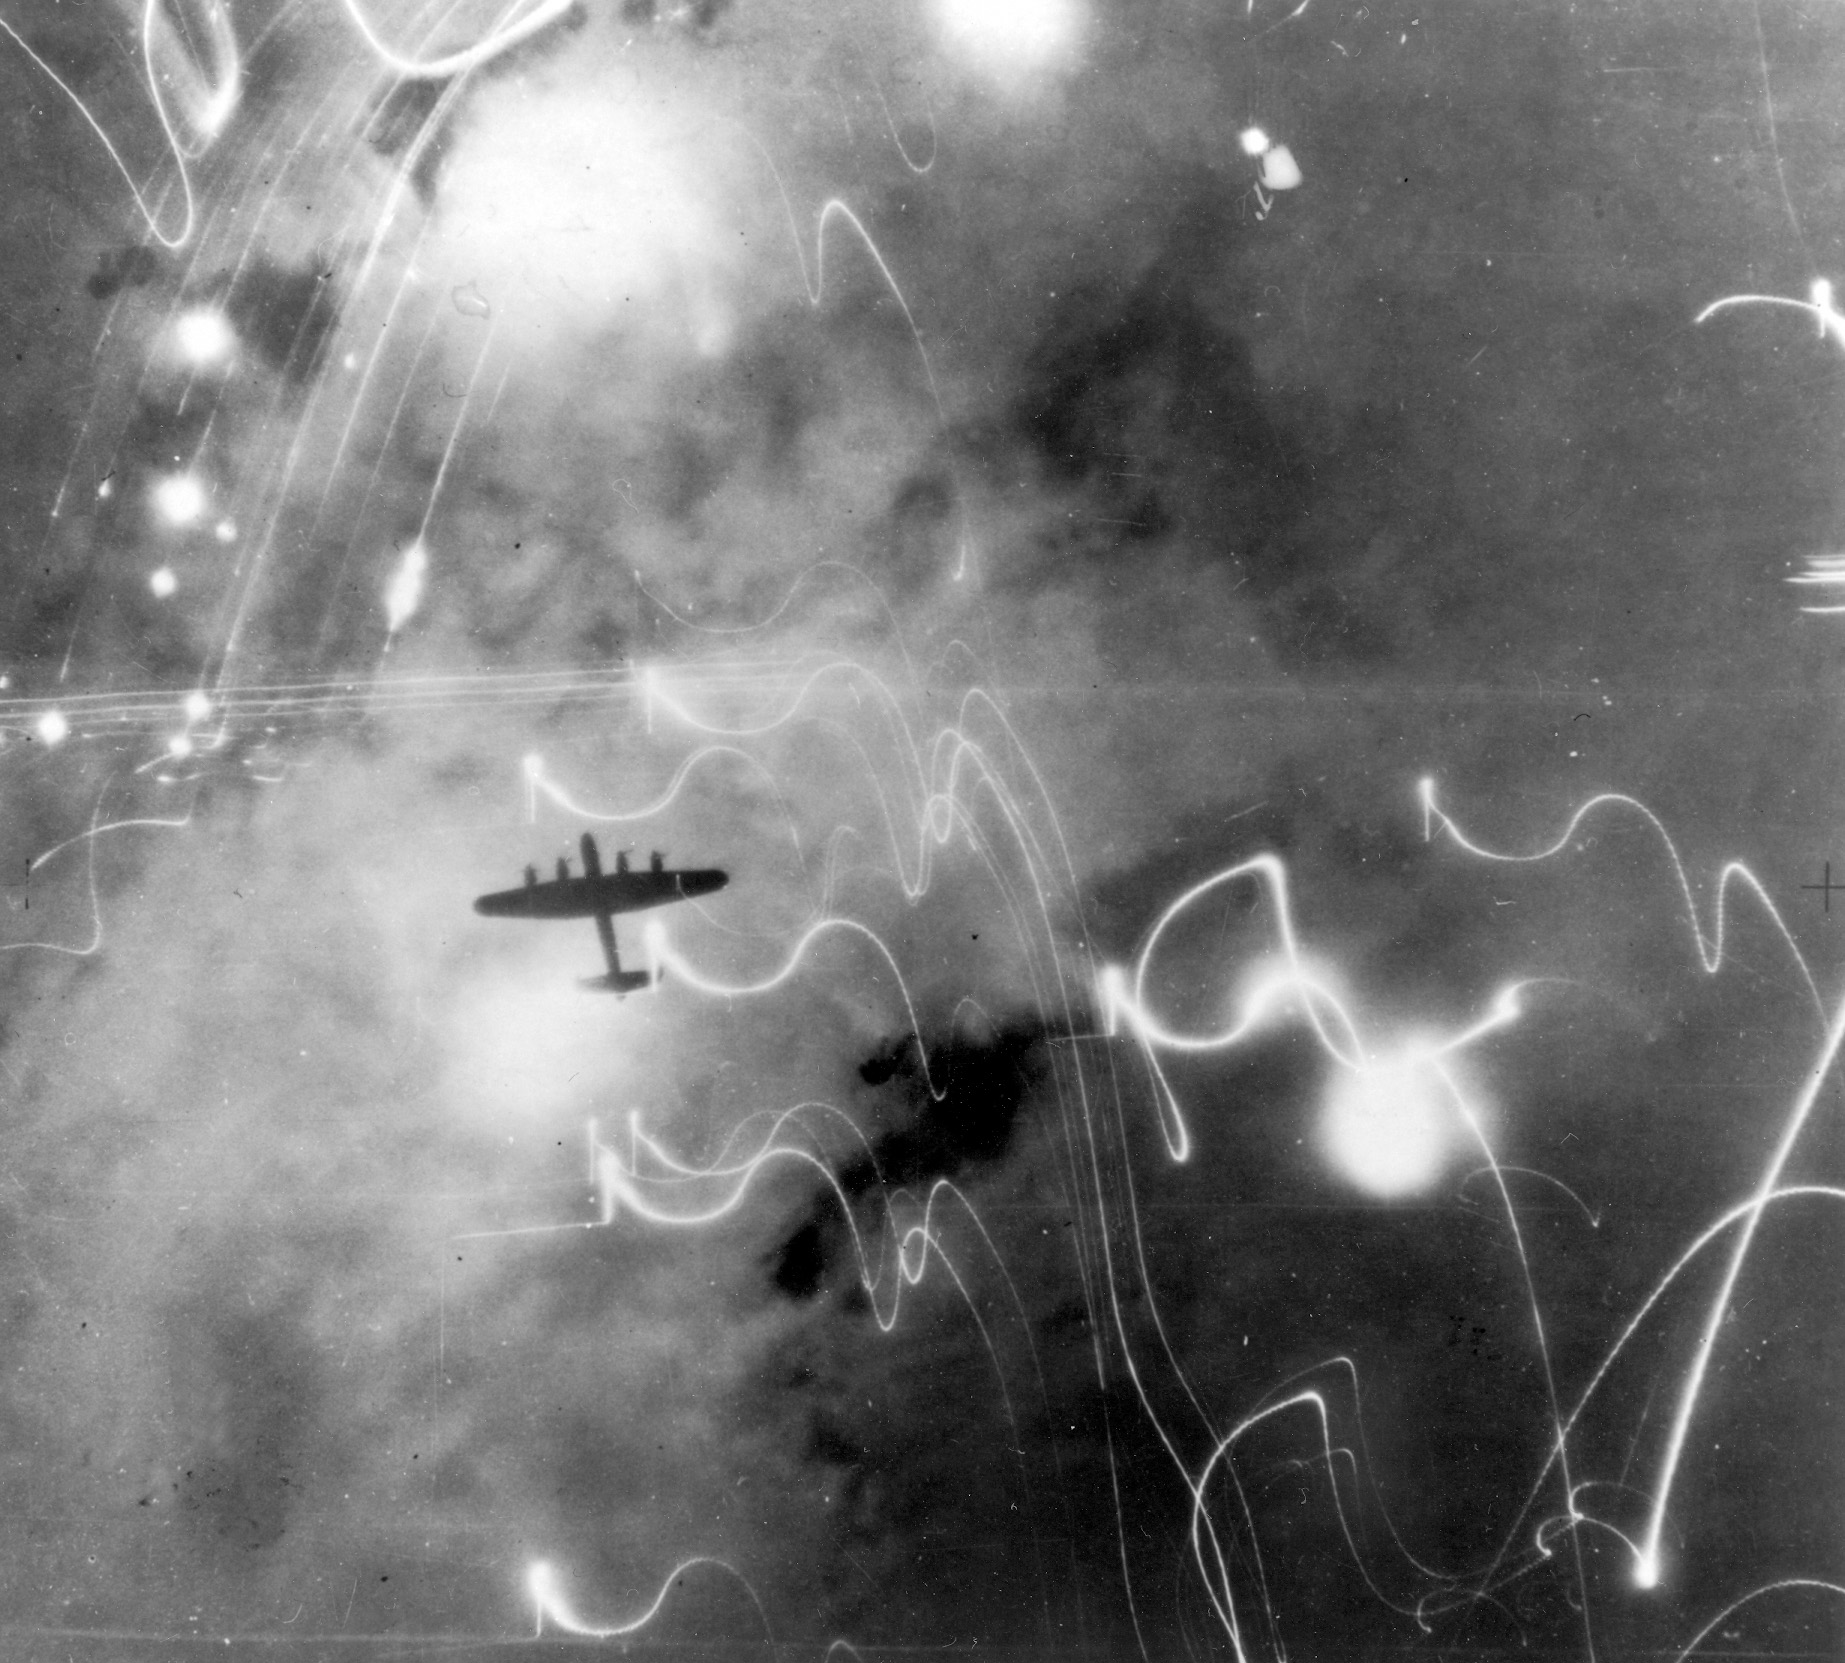 Smoke, flames, and antiaircraft fire silhouette a British Avro Lancaster bomber during a January 30, 1943, raid on the German city of Hamburg. In July 1943, Allied bombing raids created a 
devastating firestorm in Hamburg that burned and suffocated thousands of people.